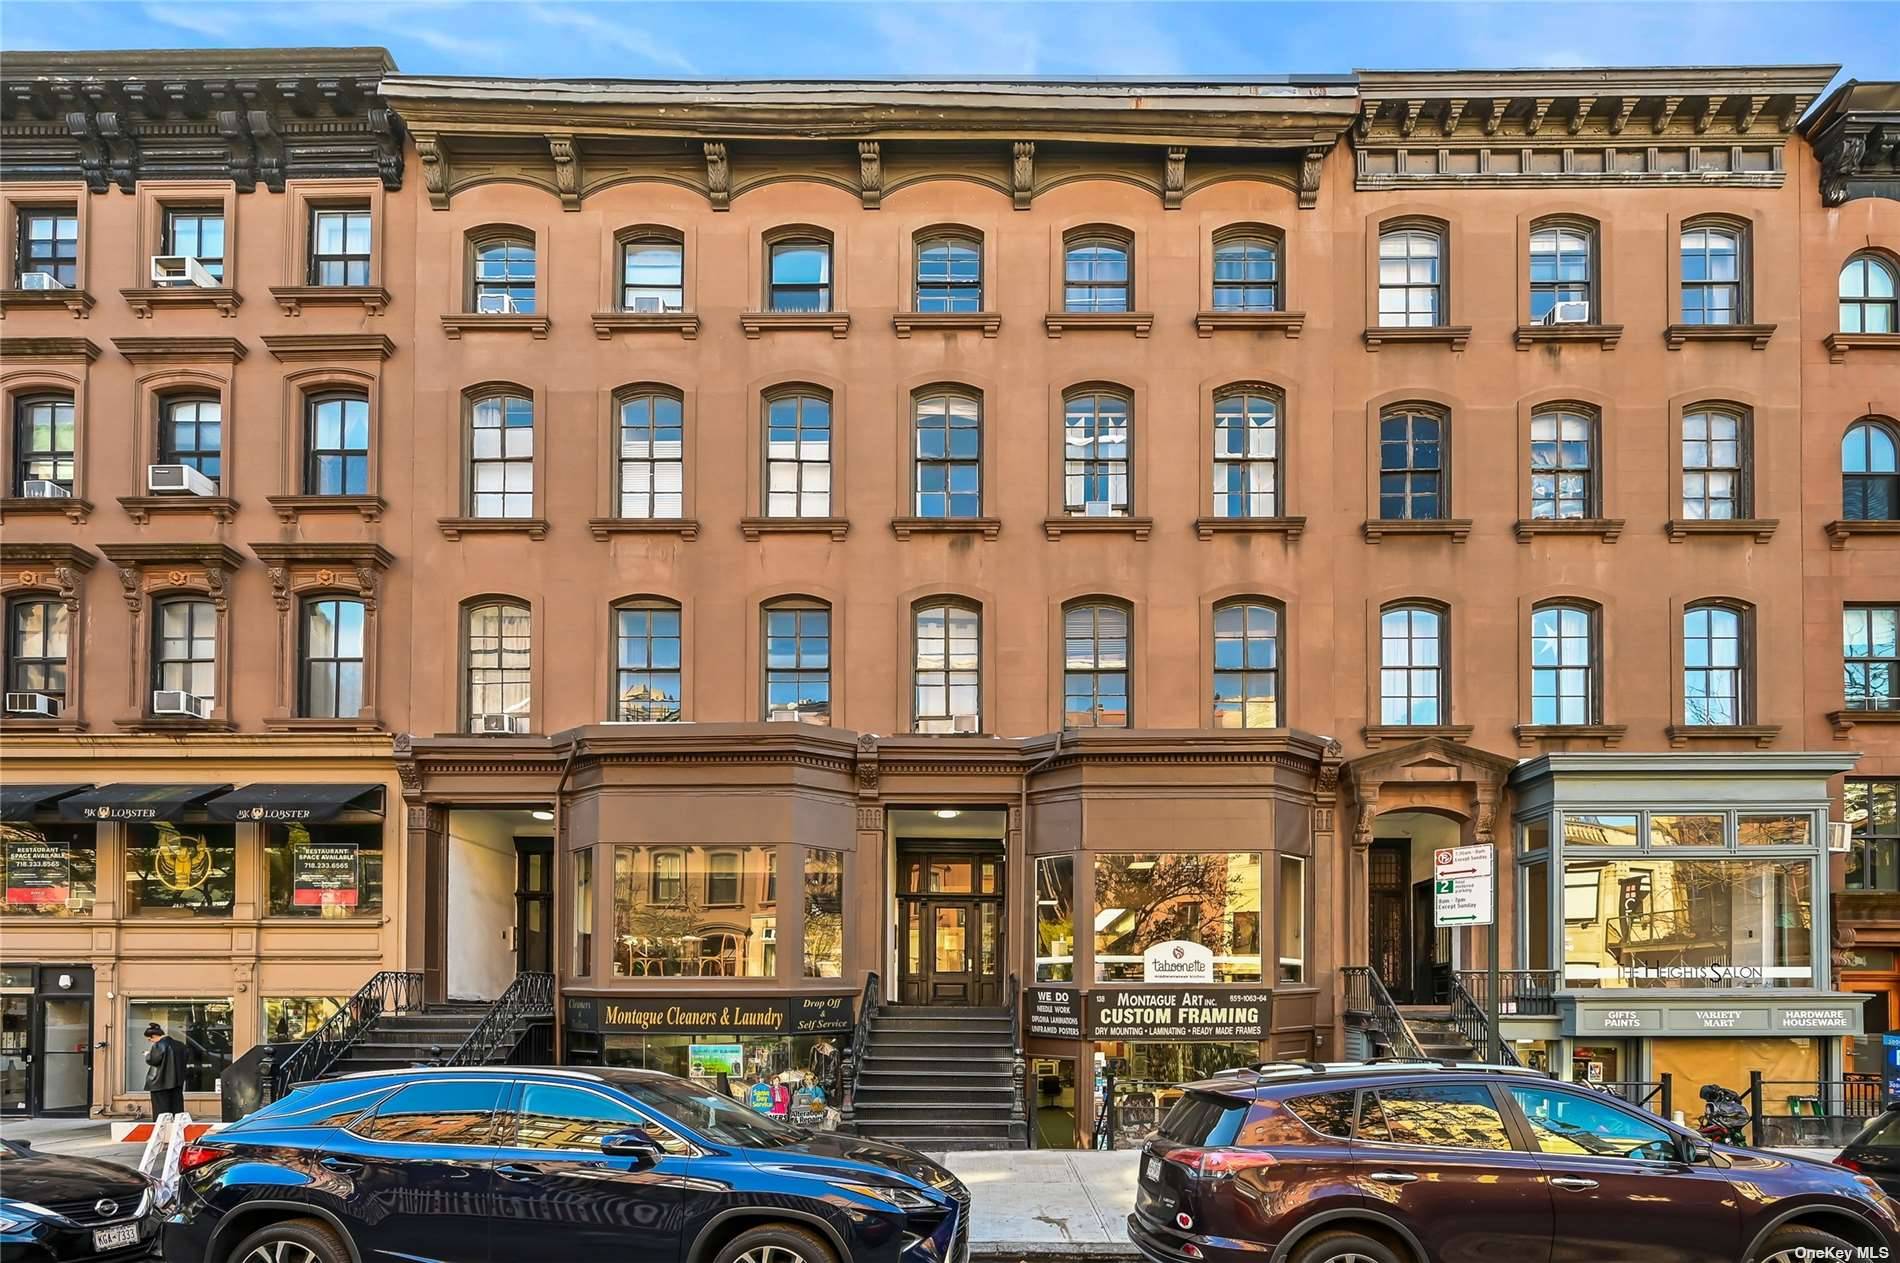 The ideal trophy asset introducing your opportunity to acquire 138 140 Montague Street, a Landmark Commercial building located in the Heart of Brooklyn Heights.